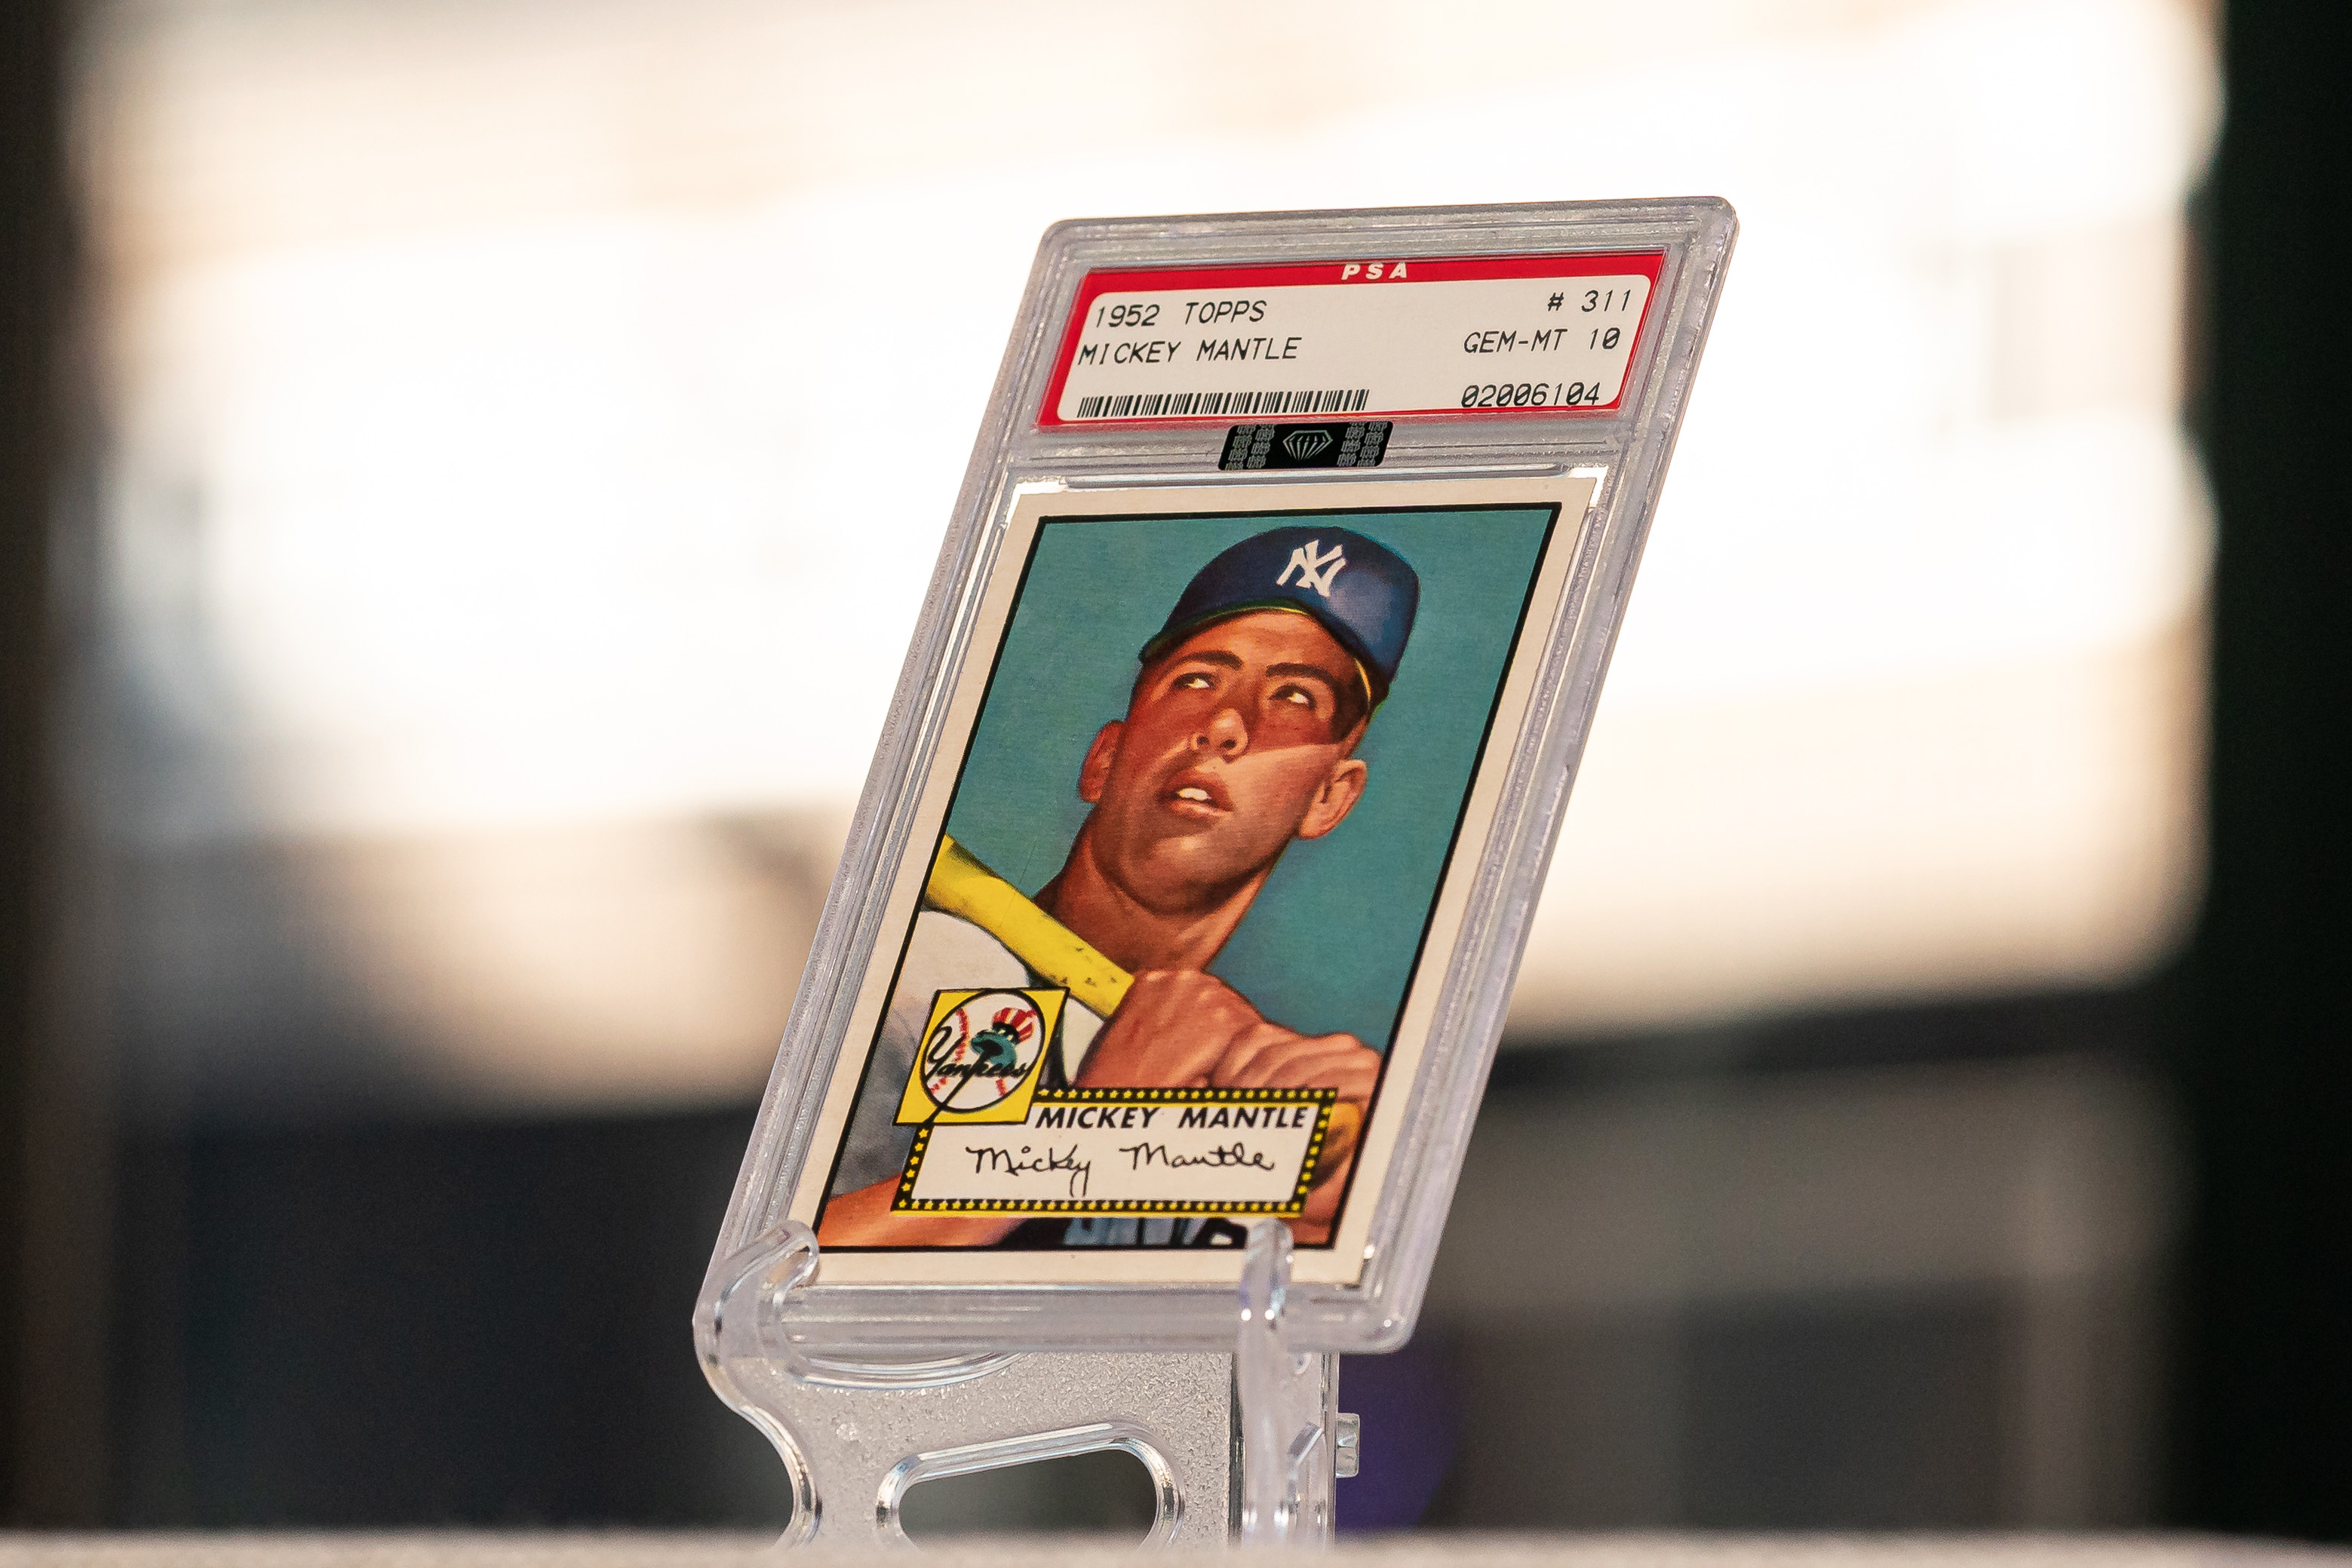 Mickey Mantle Baseball Trading Card Sets Record $12.6 Million at Auction -  Bloomberg